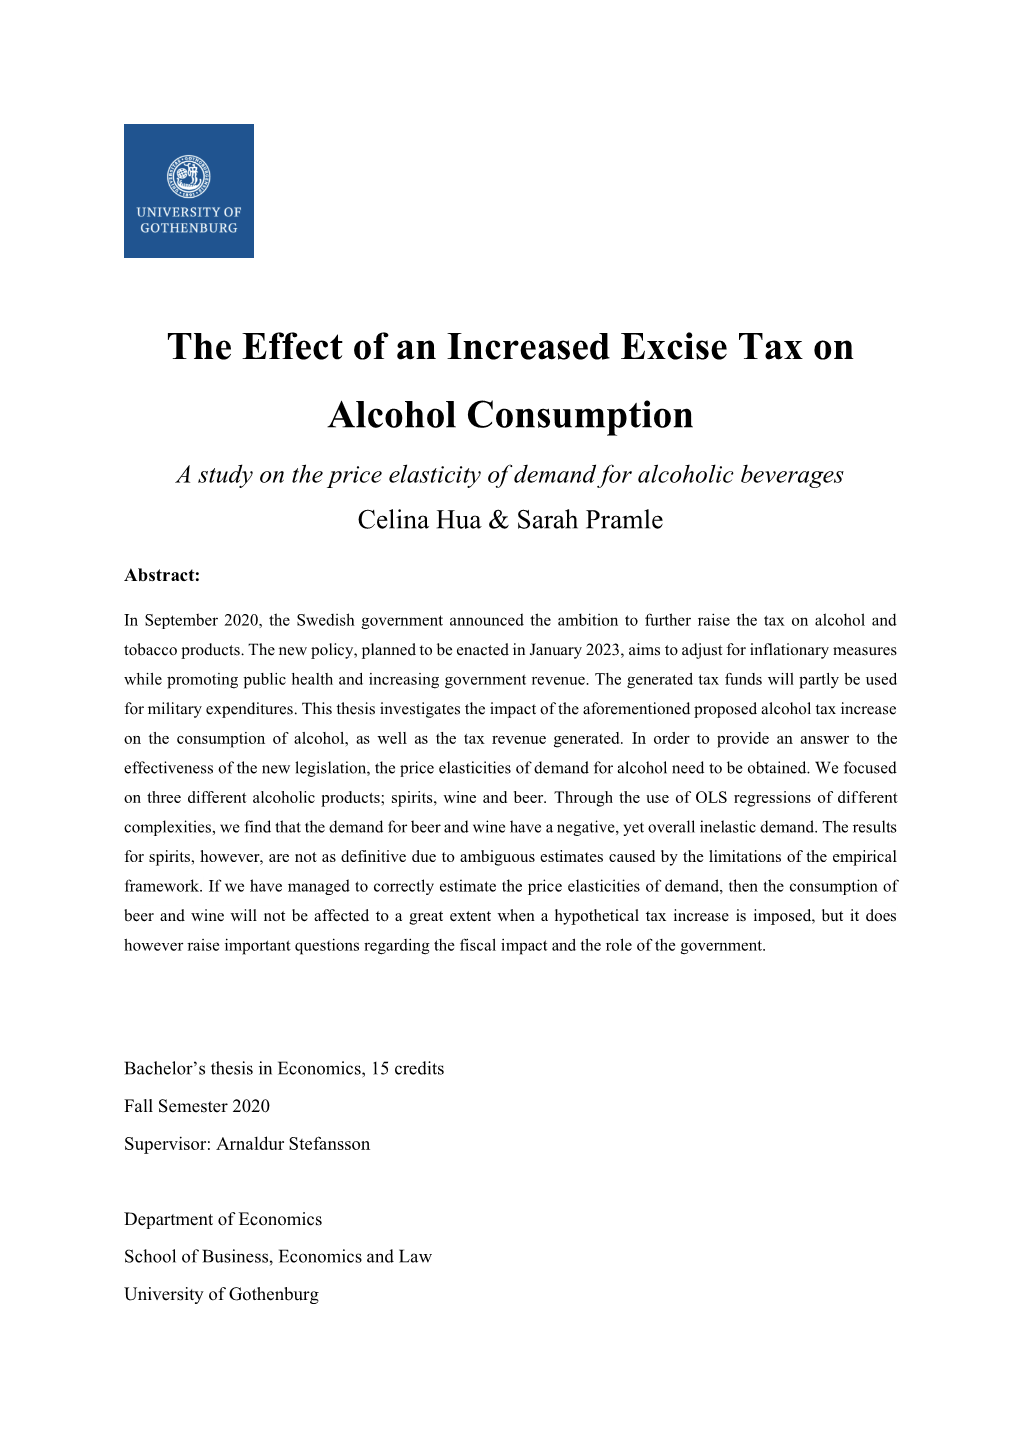 The Effect of an Increased Excise Tax on Alcohol Consumption a Study on the Price Elasticity of Demand for Alcoholic Beverages Celina Hua & Sarah Pramle